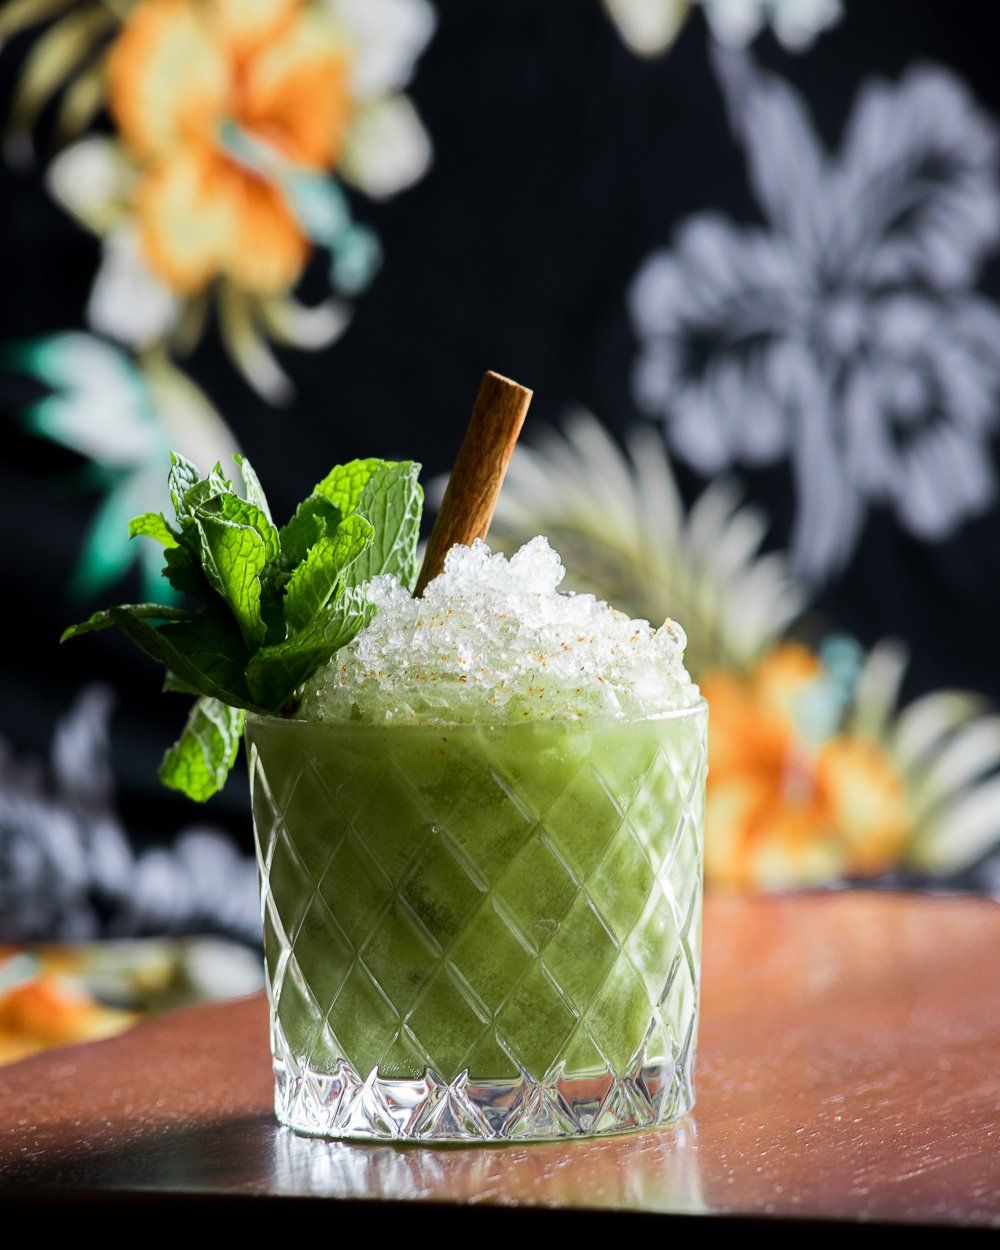 highball glass filled with crushed ice and green liquid, topped with mint and a cinnamon stick